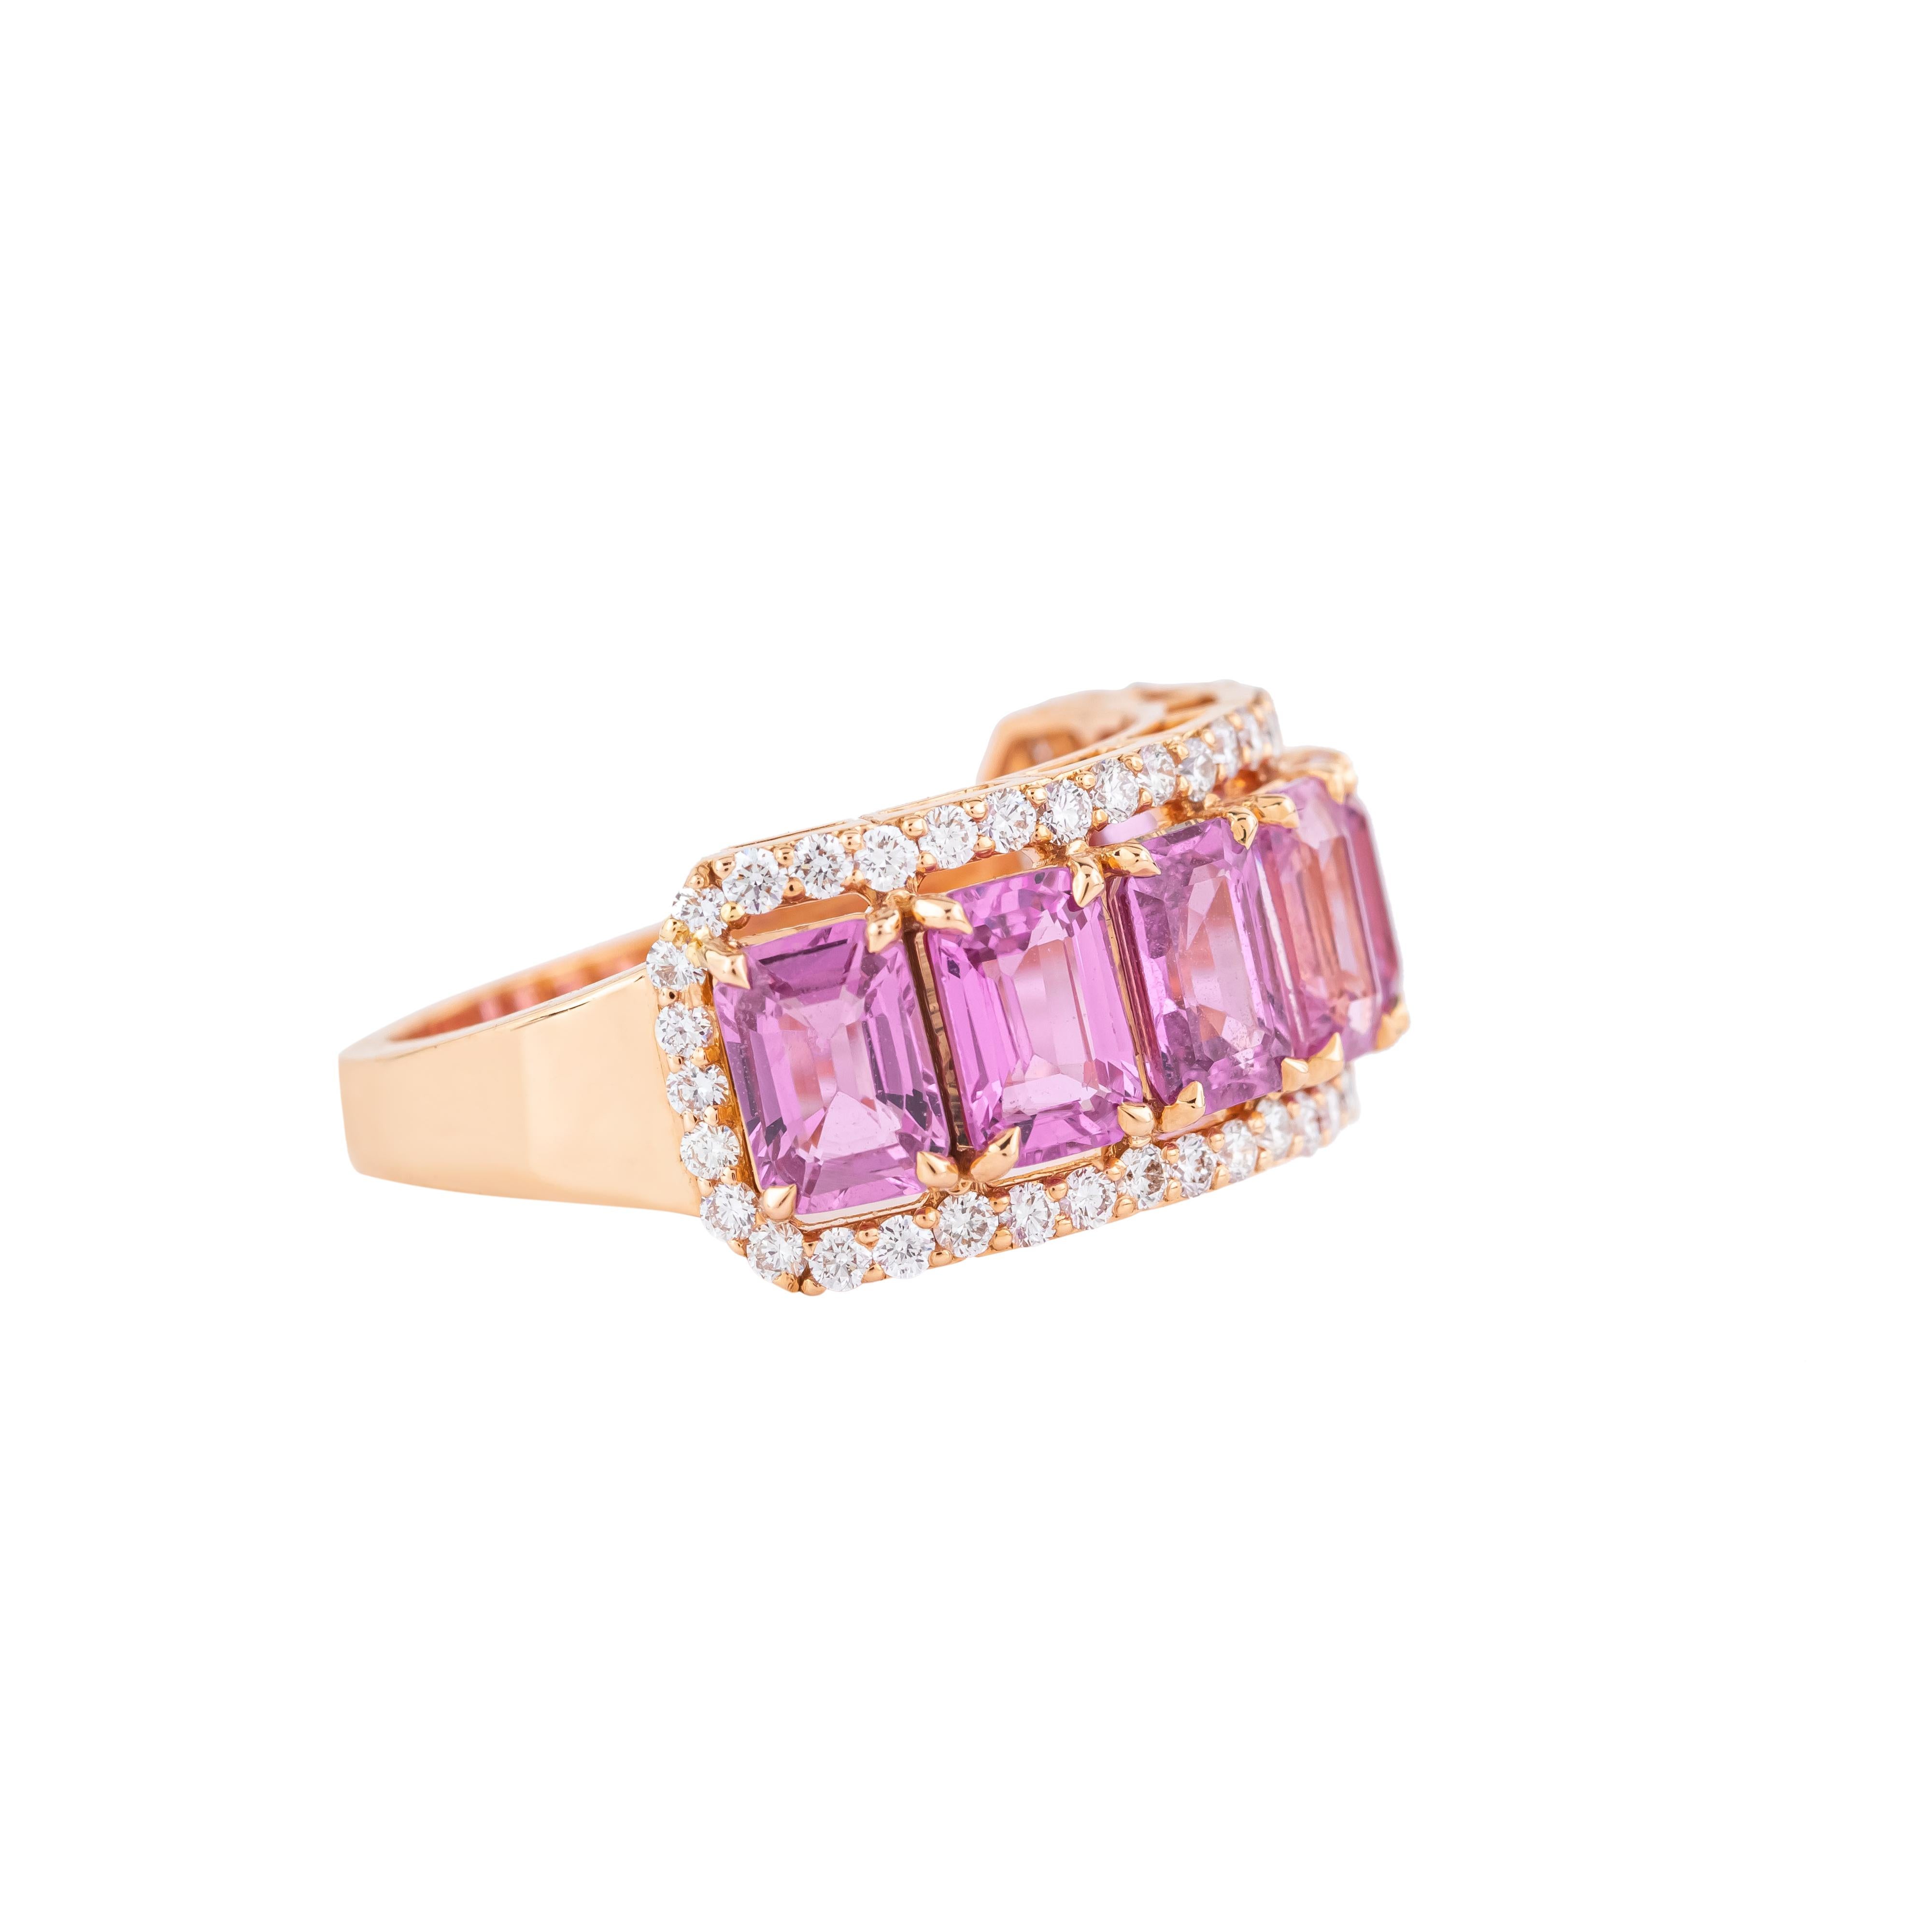 Immerse yourself in the allure of sophistication with our 18 Karat Gold 5.34 Carat Diamond and Pink Sapphire Half Band Ring – a harmonious blend of luxury and elegance. Each ring is meticulously crafted and curated, reflecting our dedication to